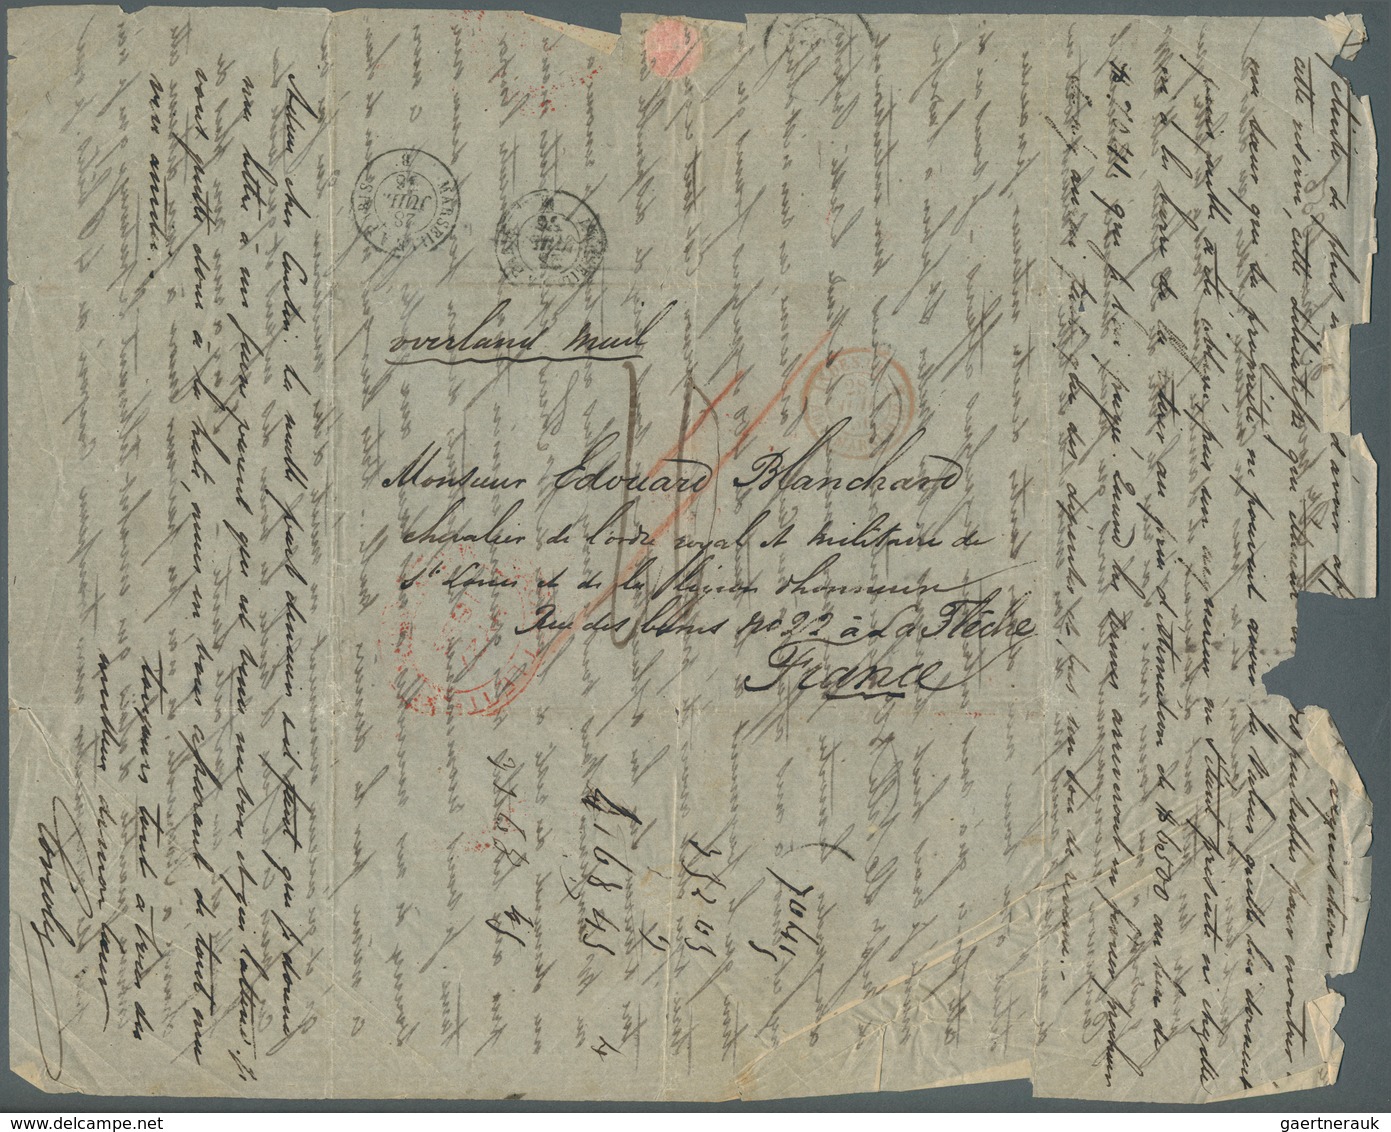 Mauritius: 1844/57 (ca.) A scarce correspondance with ca. 32 stampless entire letters from a sender,